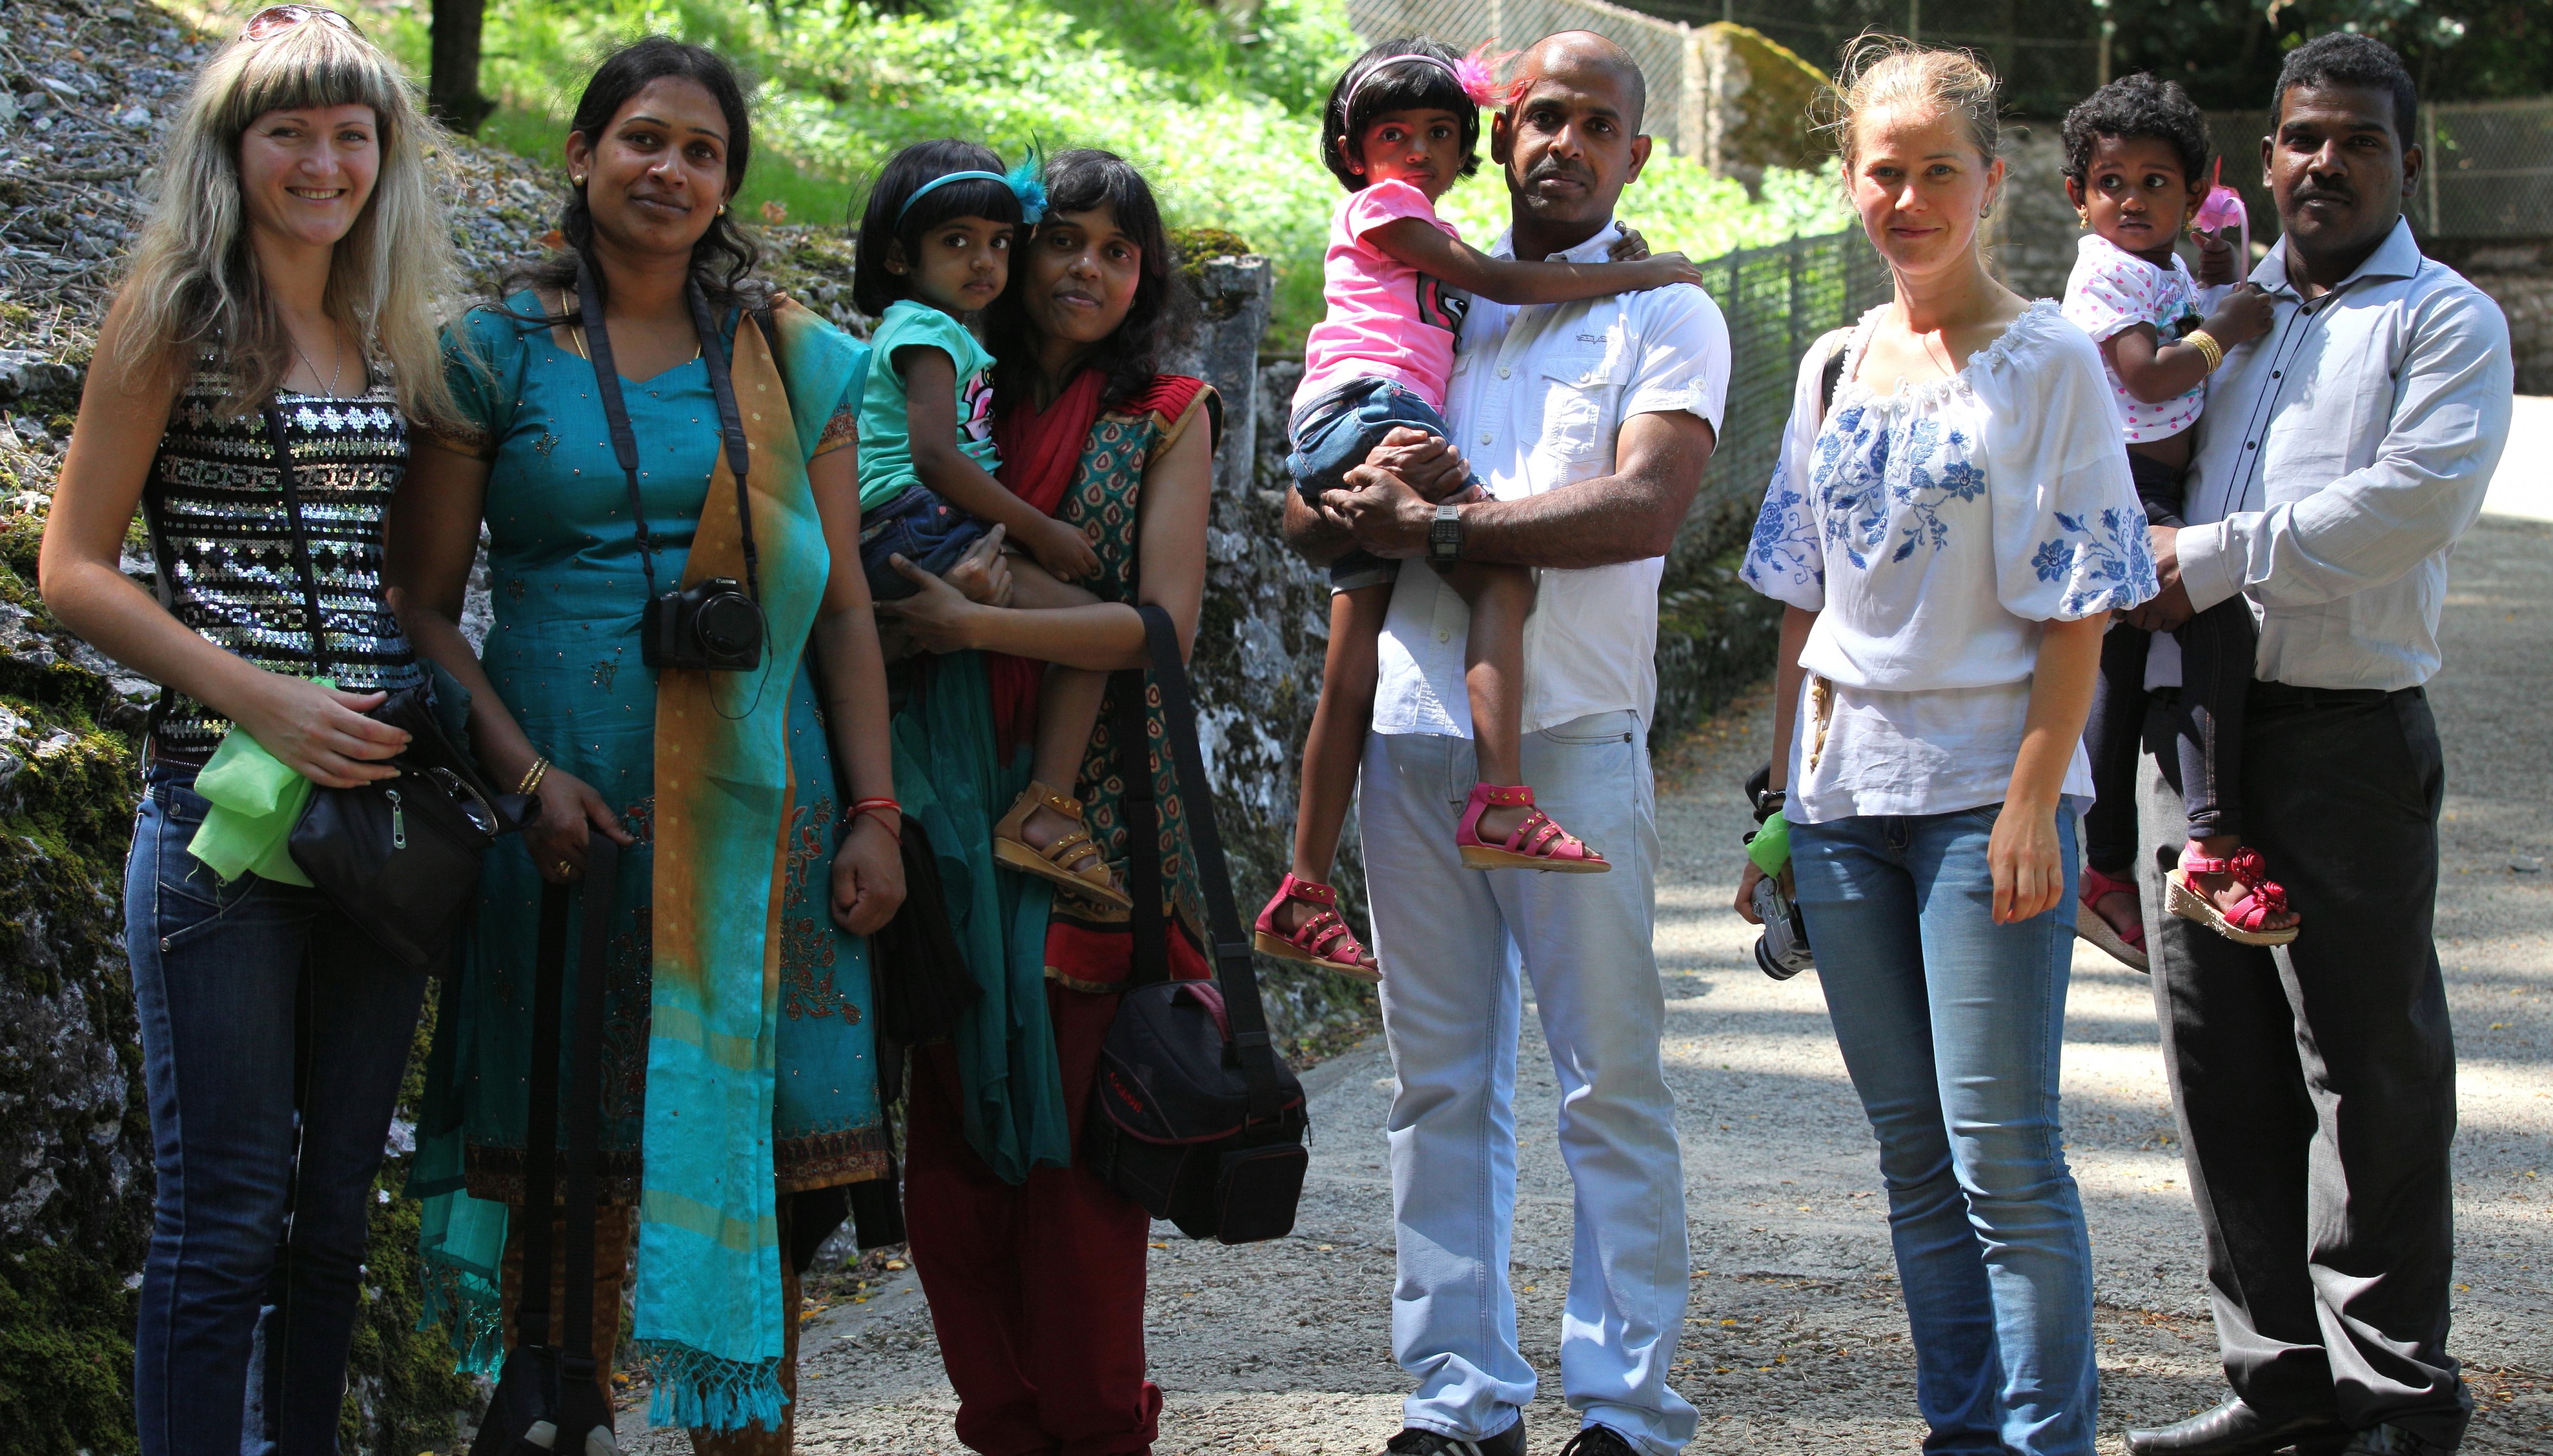 people of different nations (Ukrainian, Sri Lankan) in Lourdes, France, August 2013, photo 27